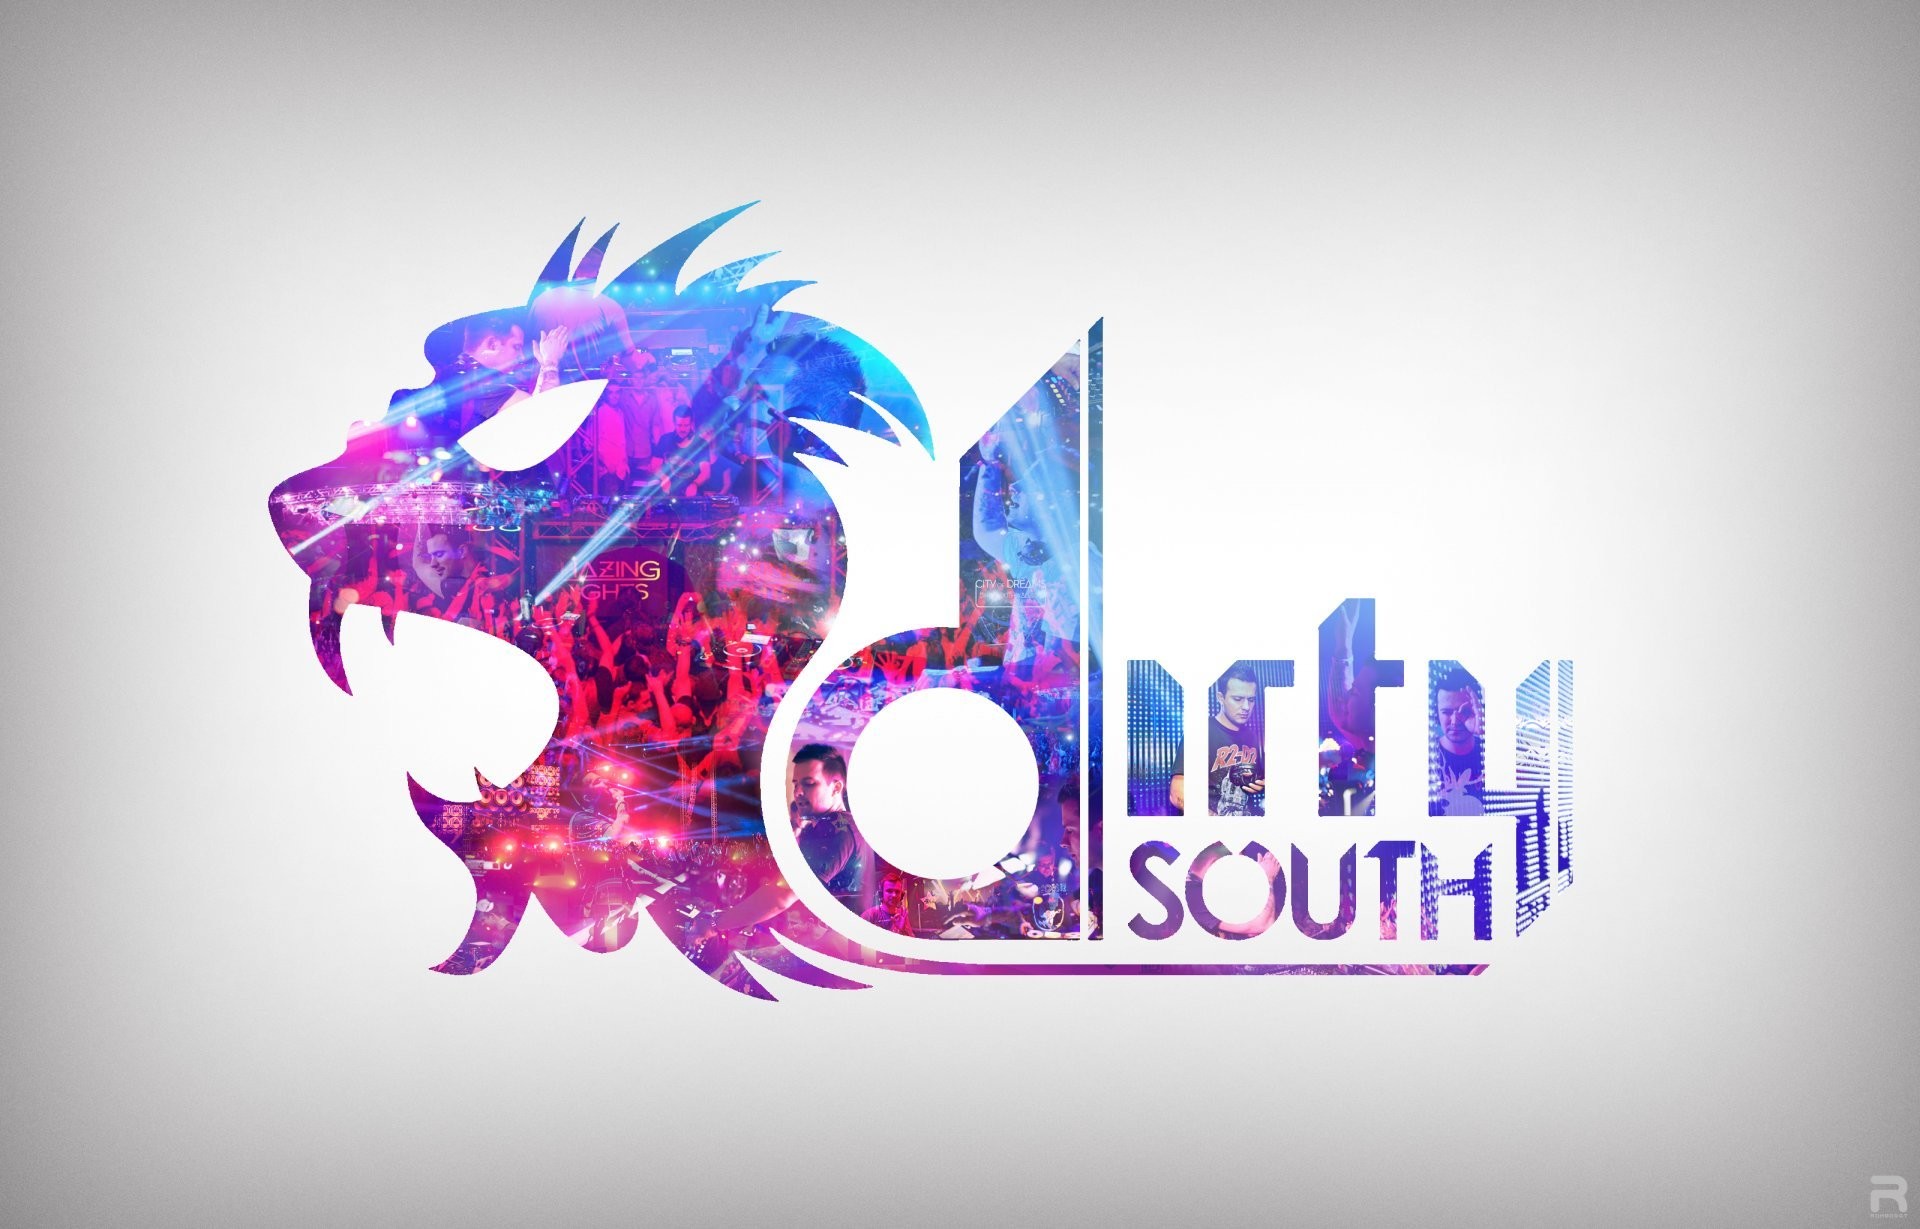 1920x1229 dirty south music electo house house trance electronic arty tiesto armin